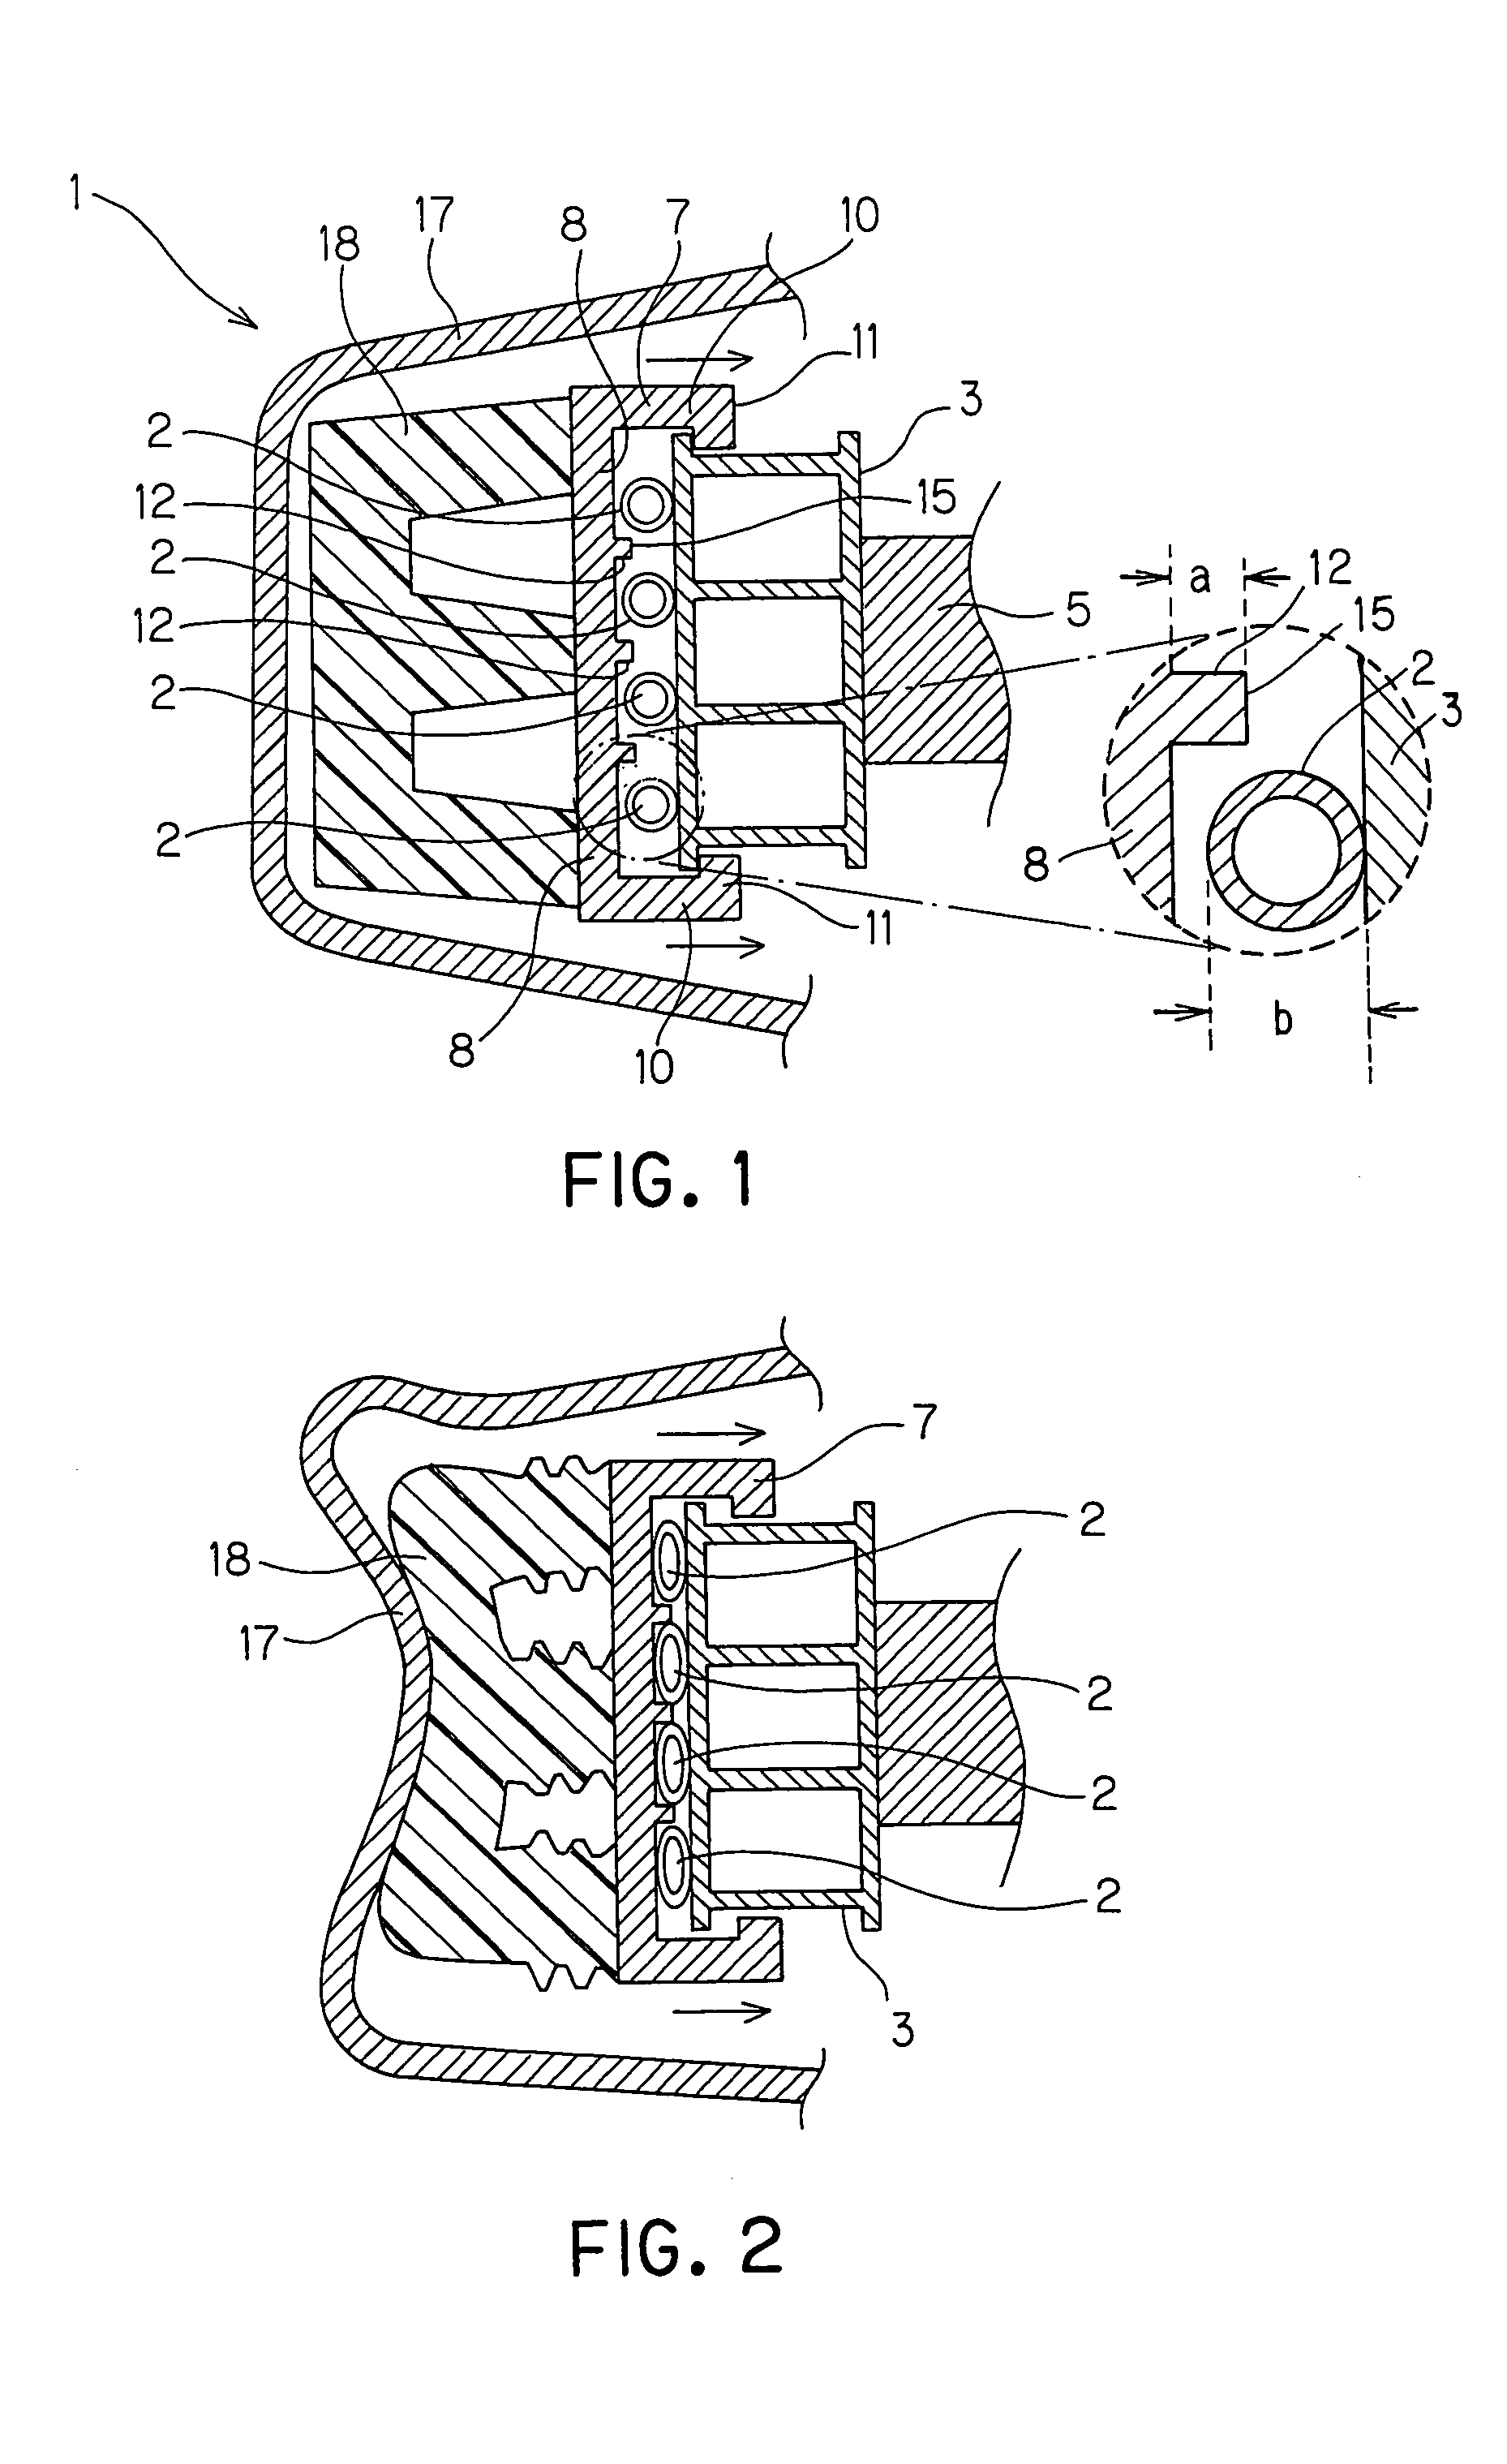 Load sensing device for automobiles